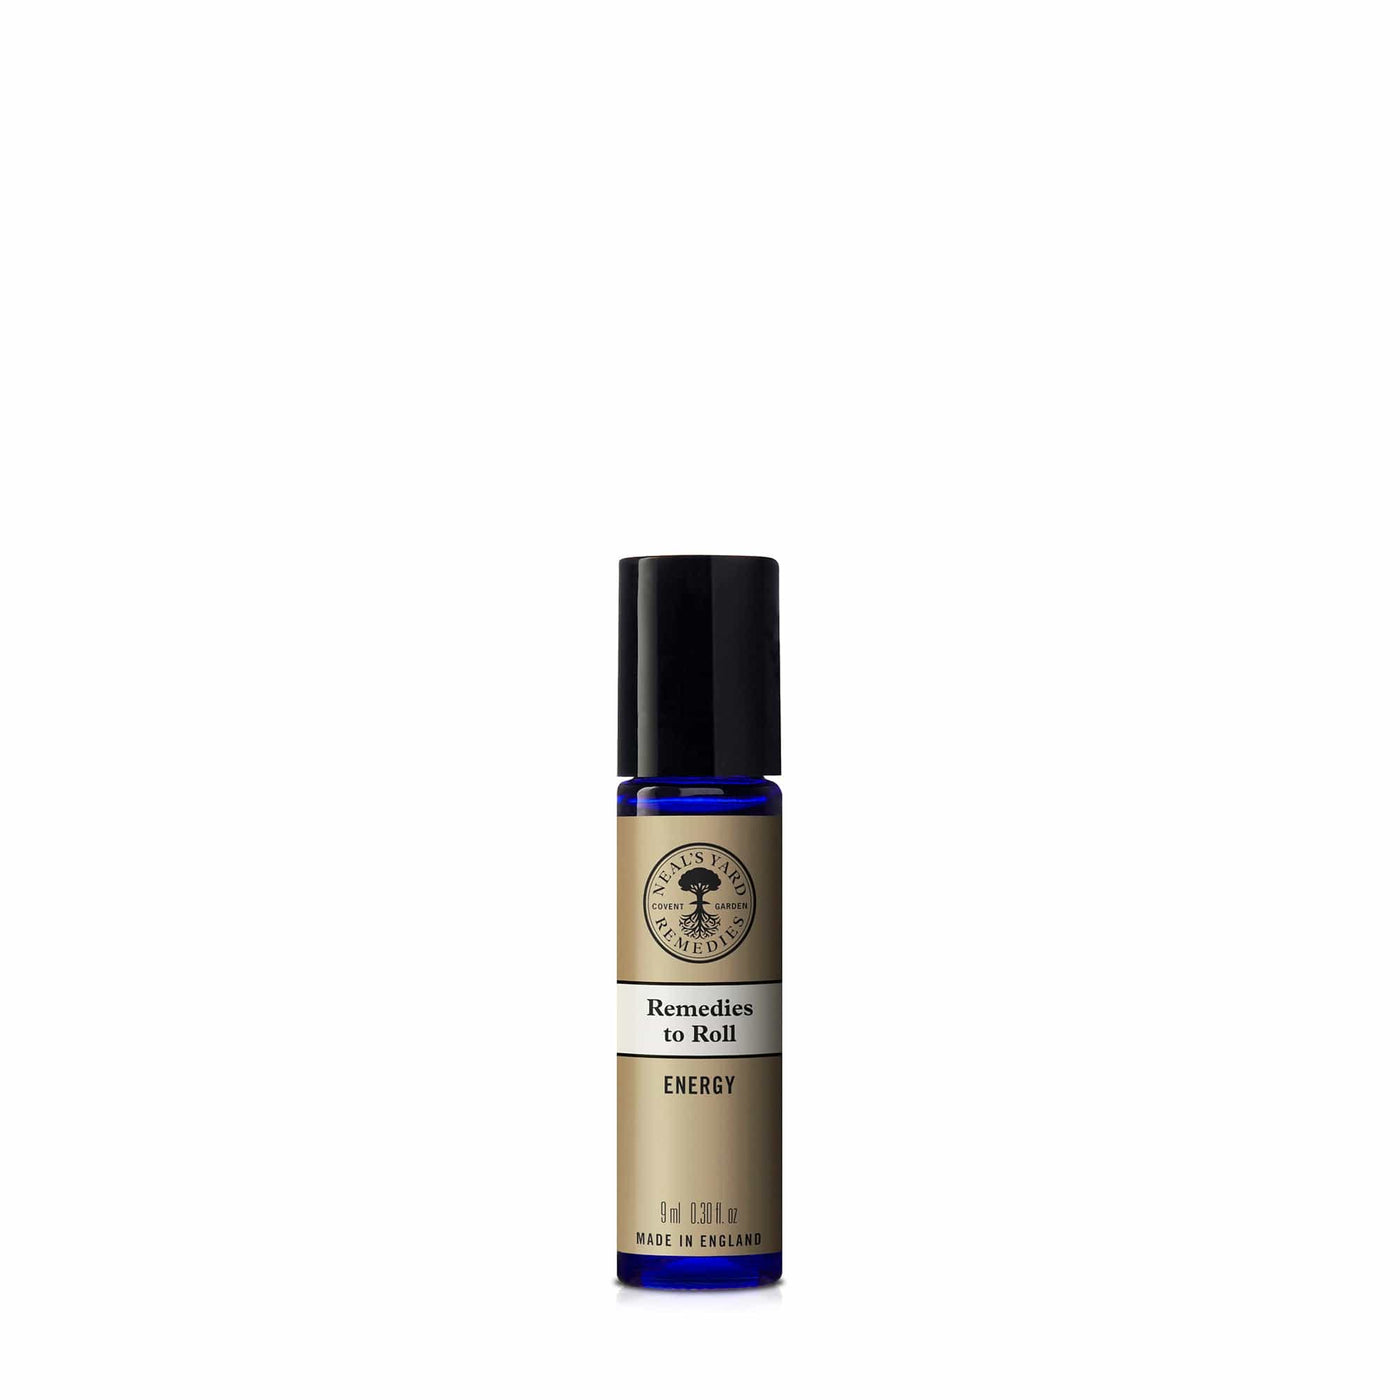 Neal's Yard Remedies Remedies to Roll  - Energy 9ml